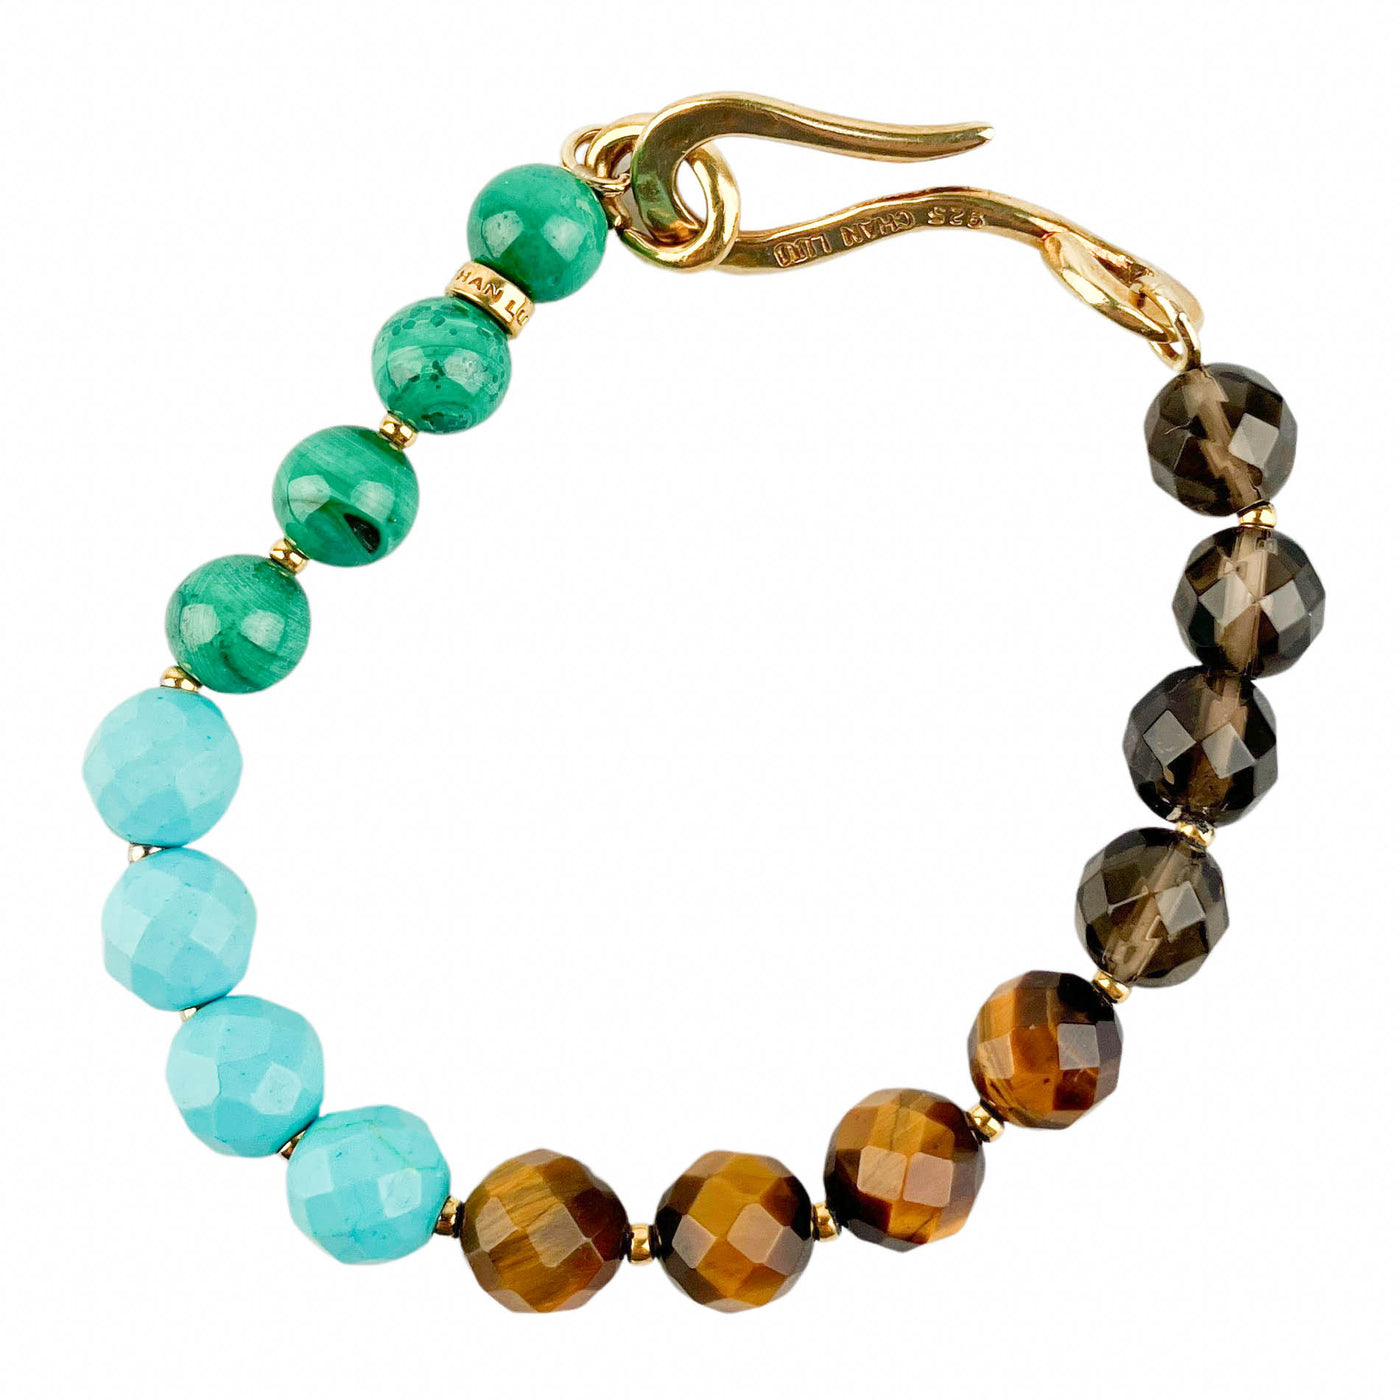 Chan Luu Unity Bracelet in Turquoise Mix - Discounts on Chan Luu at UAL